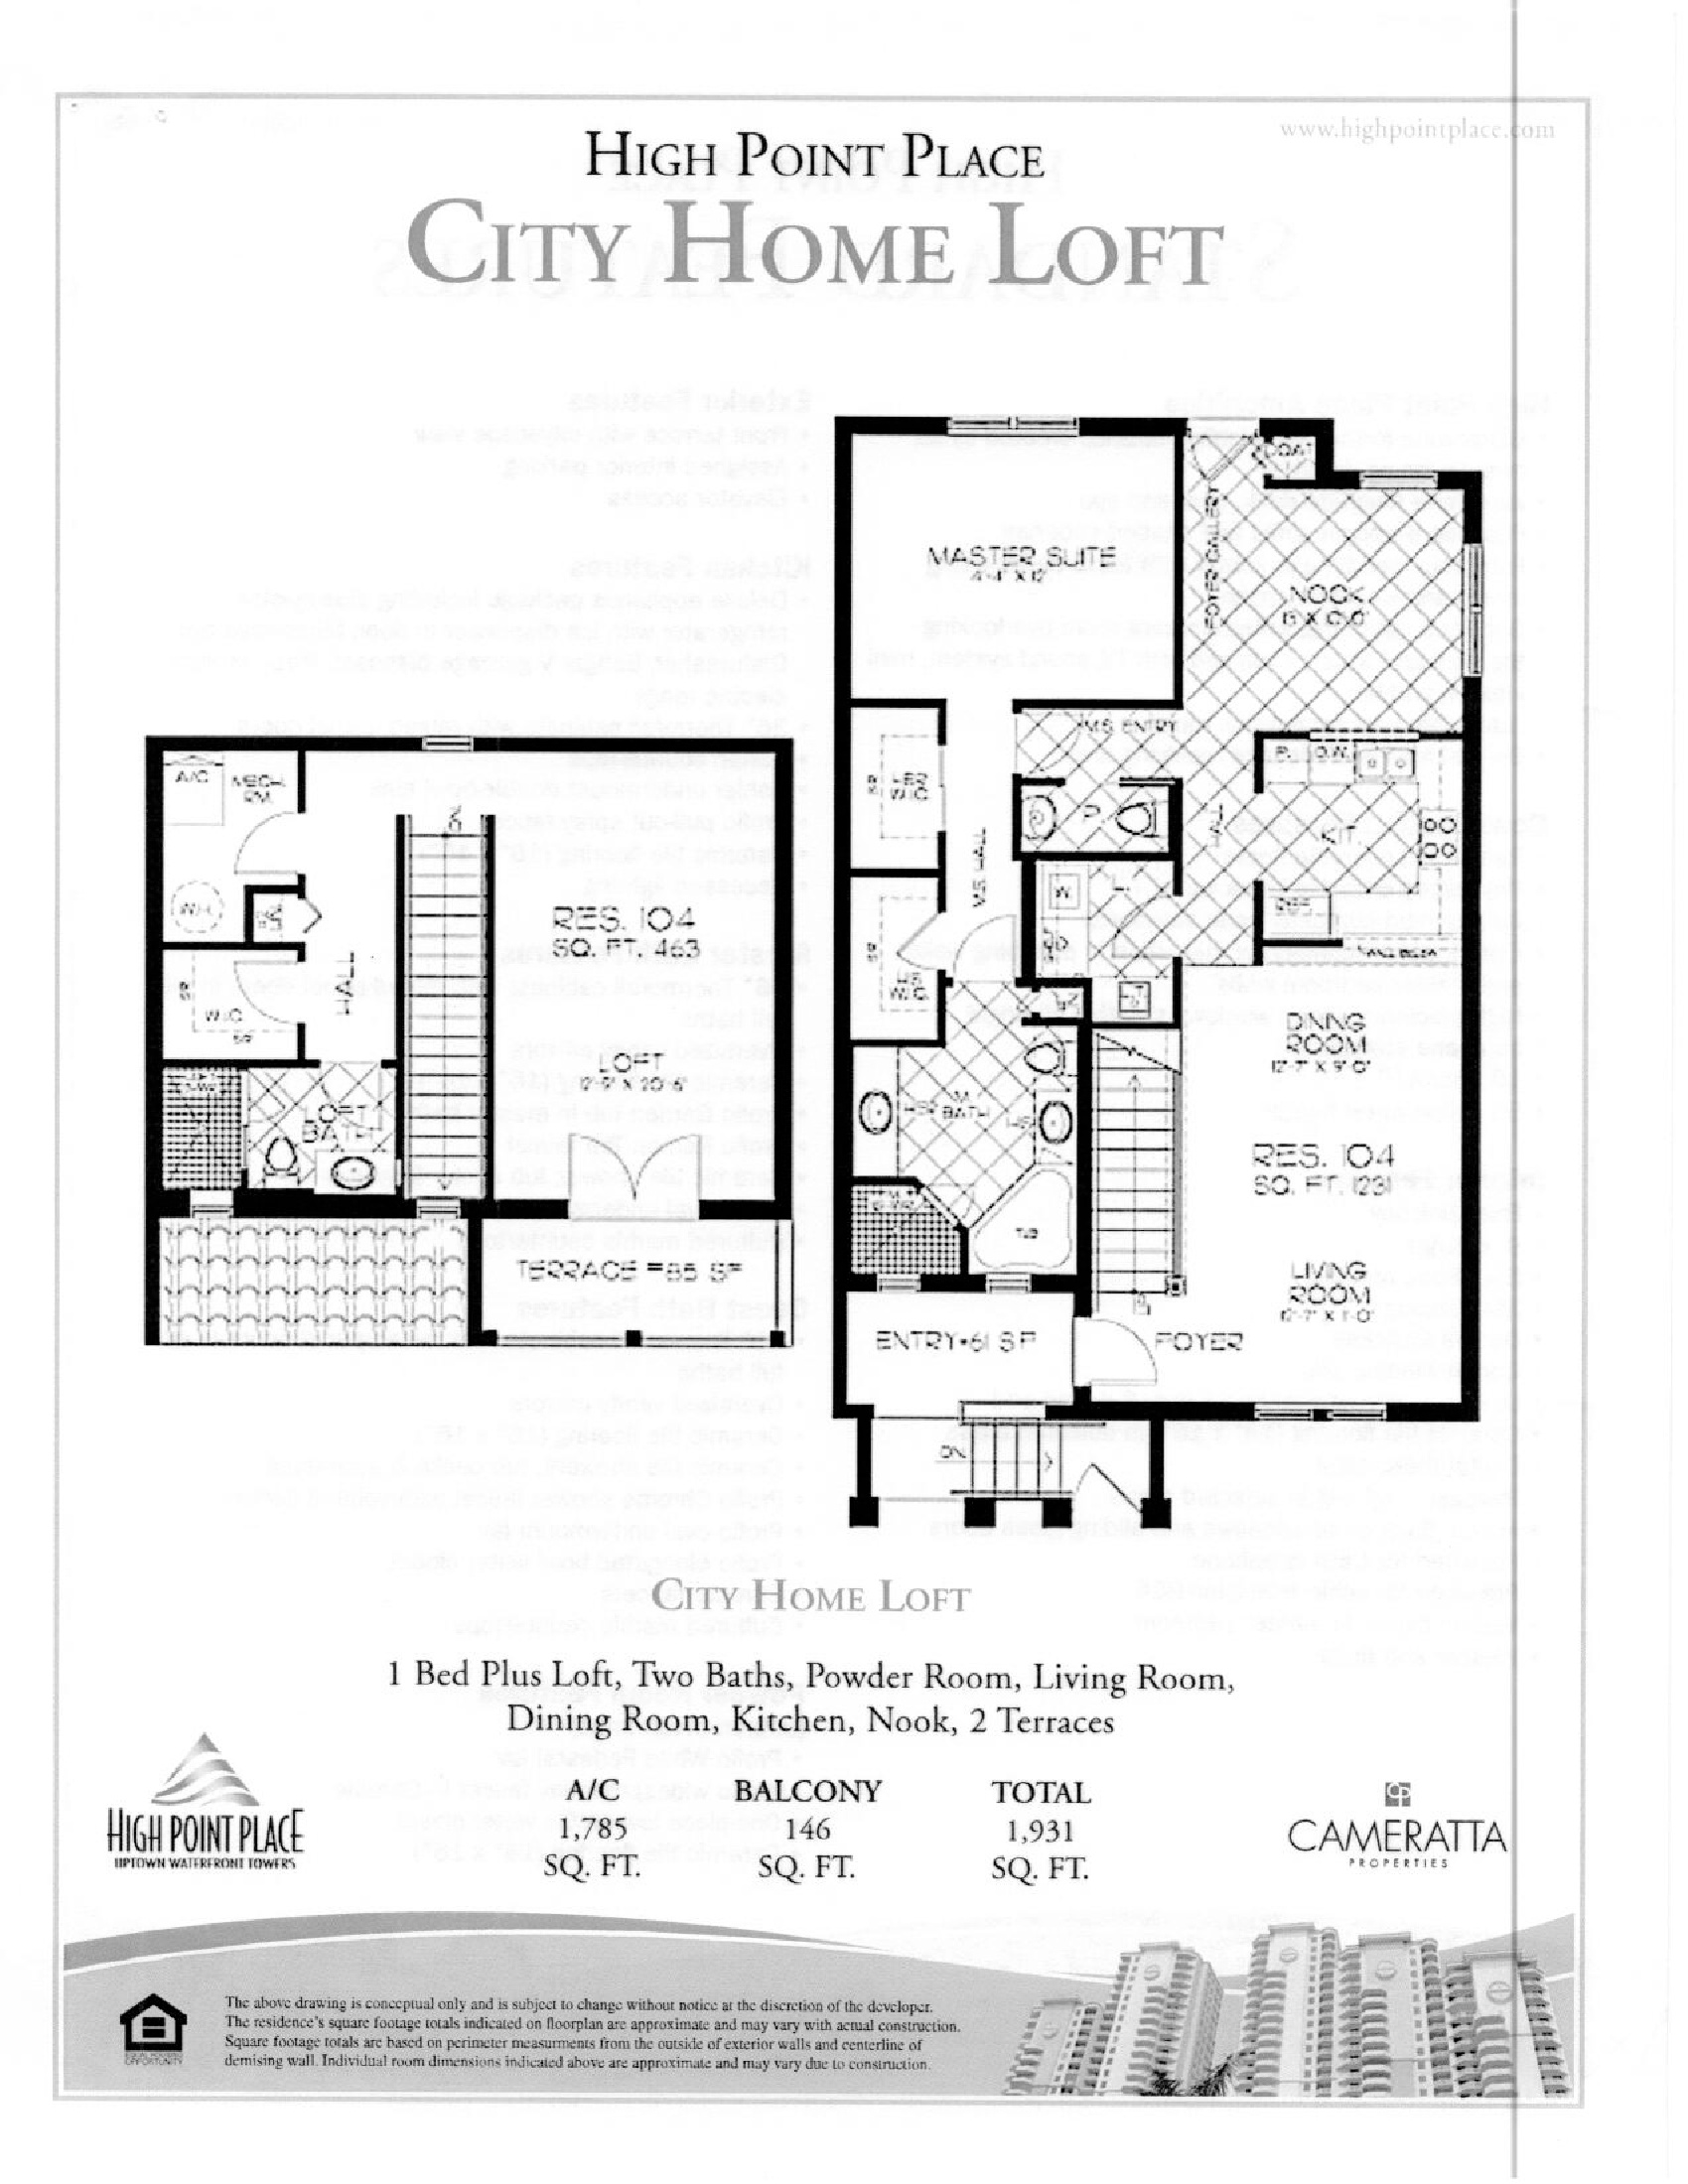 High Point Place Floor Plans